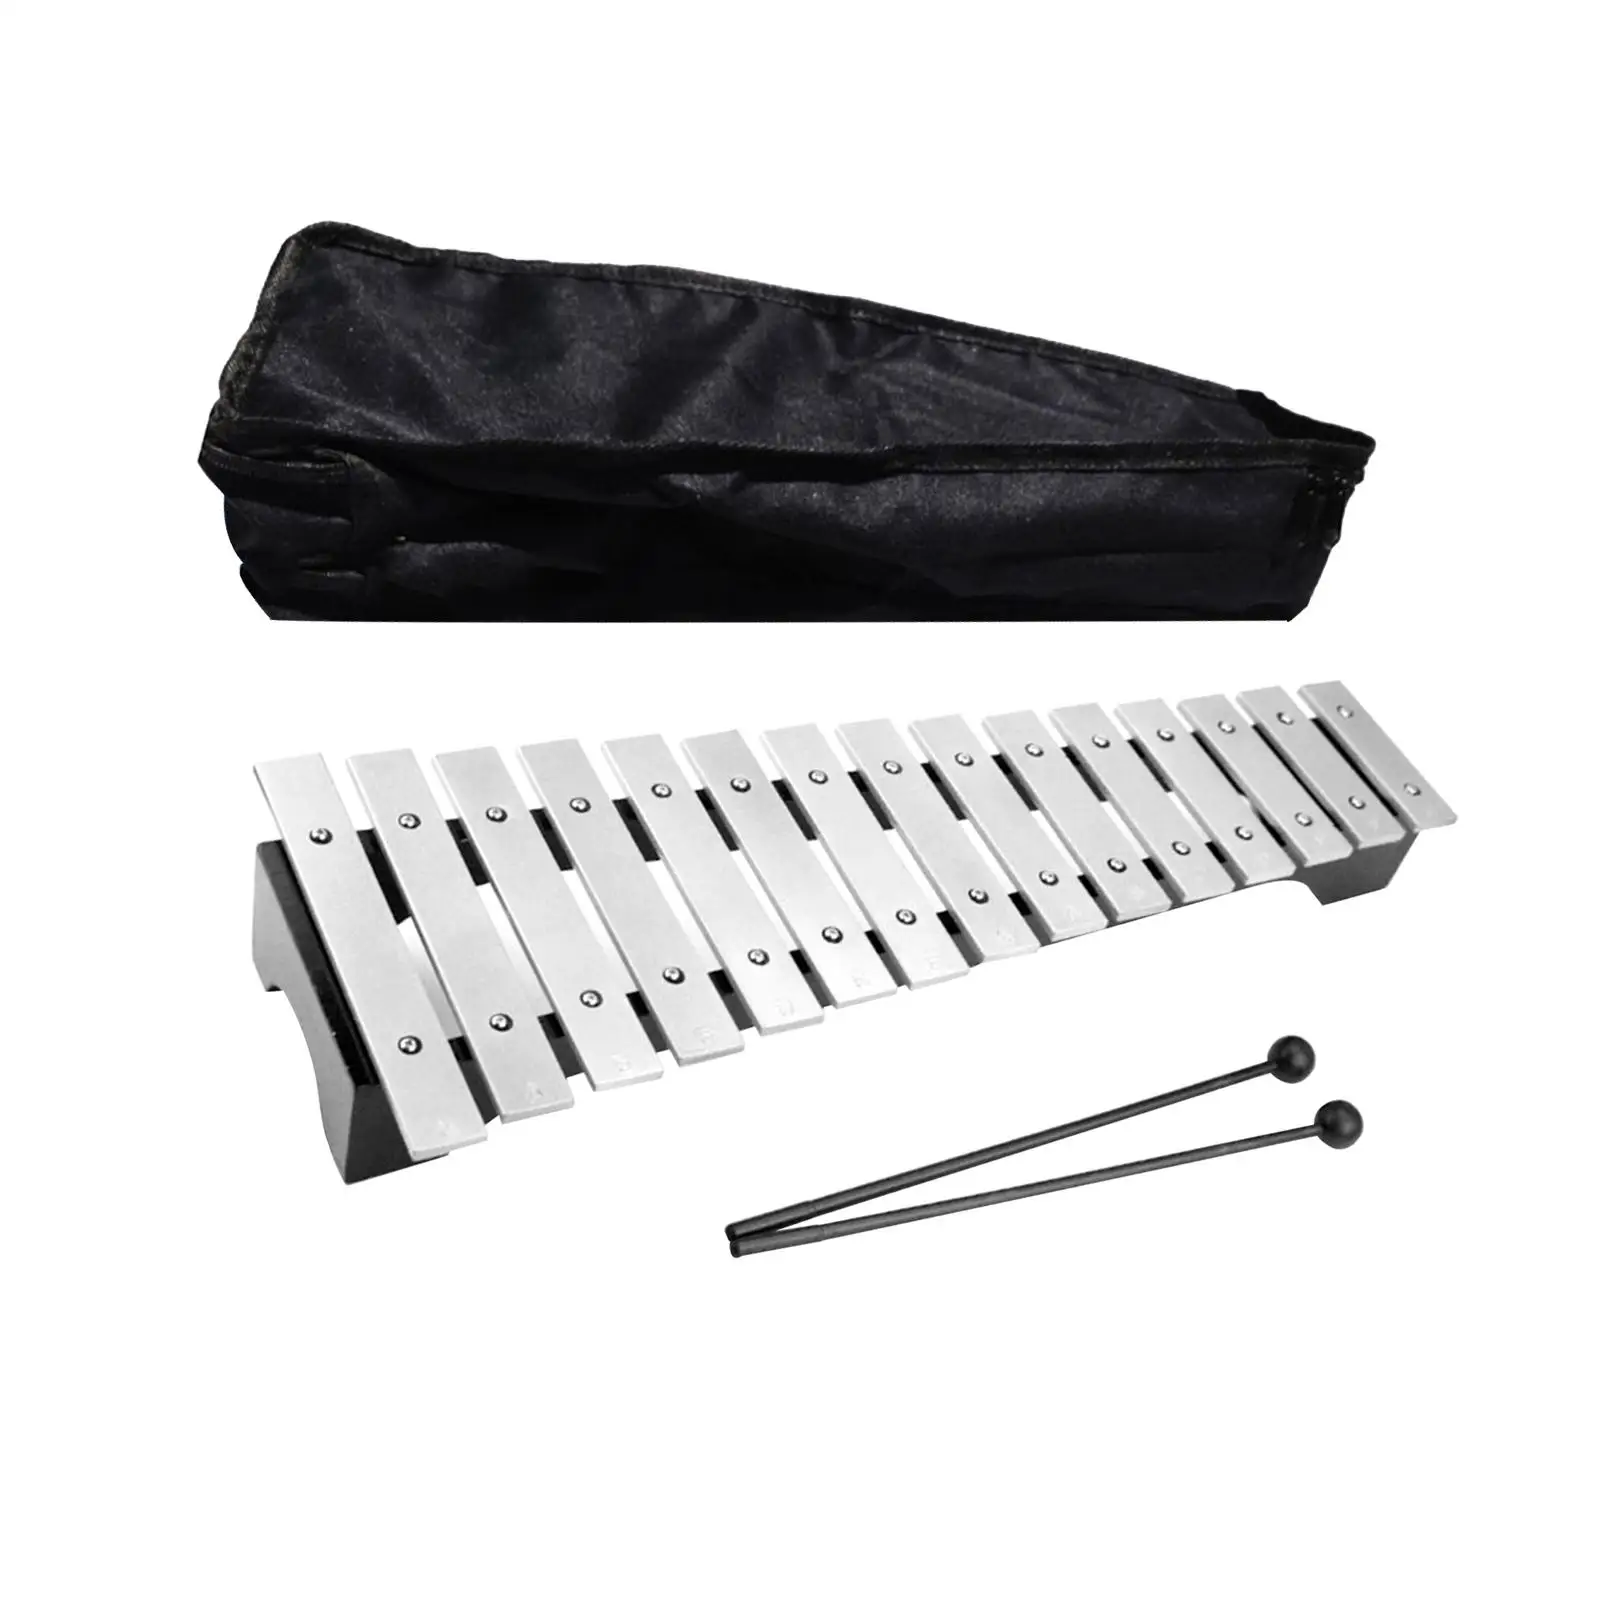 15 Scales Xylophone with Carry Case and Mallets for Kids Players